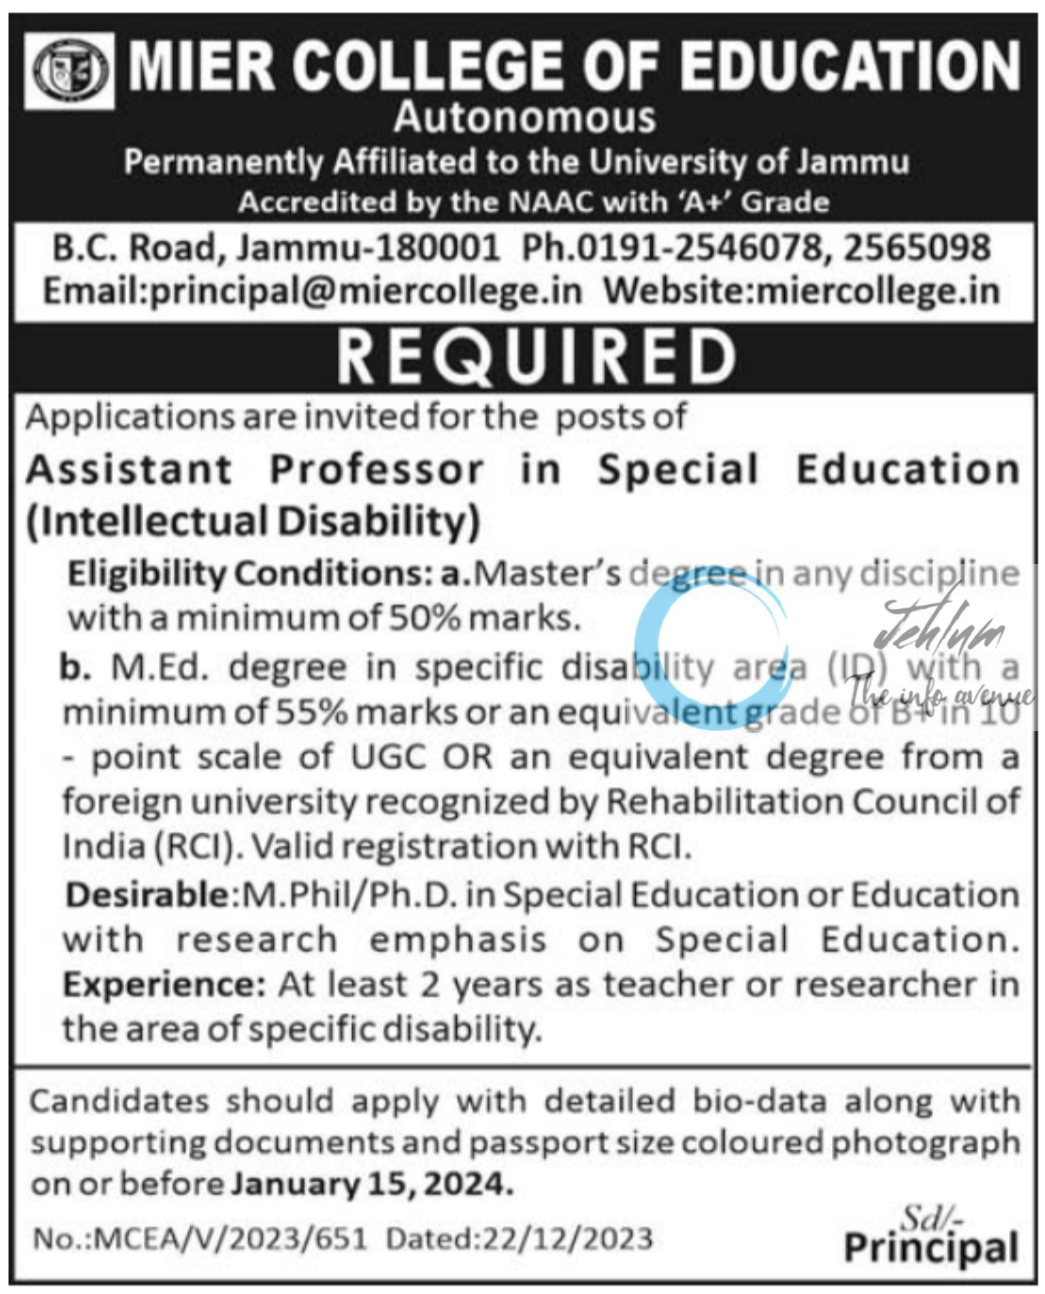 MIER COLLEGE OF EDUCATION JAMMU JOBS ADVERTISEMENT 2023